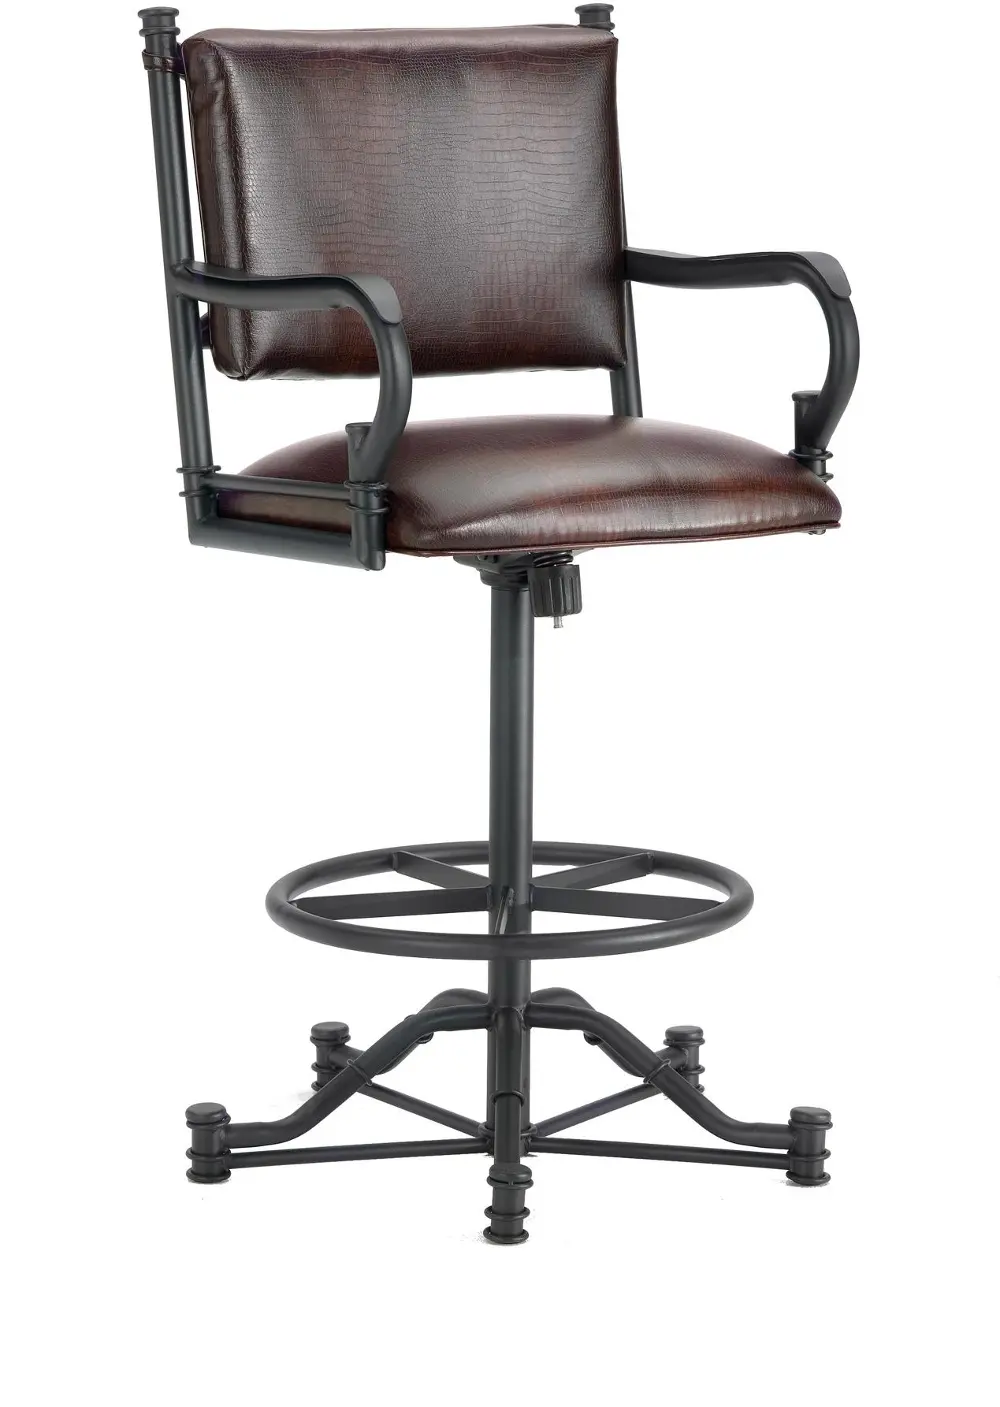 Brown and Black 30 Inch Swivel Bar Stool - Baltimore-1